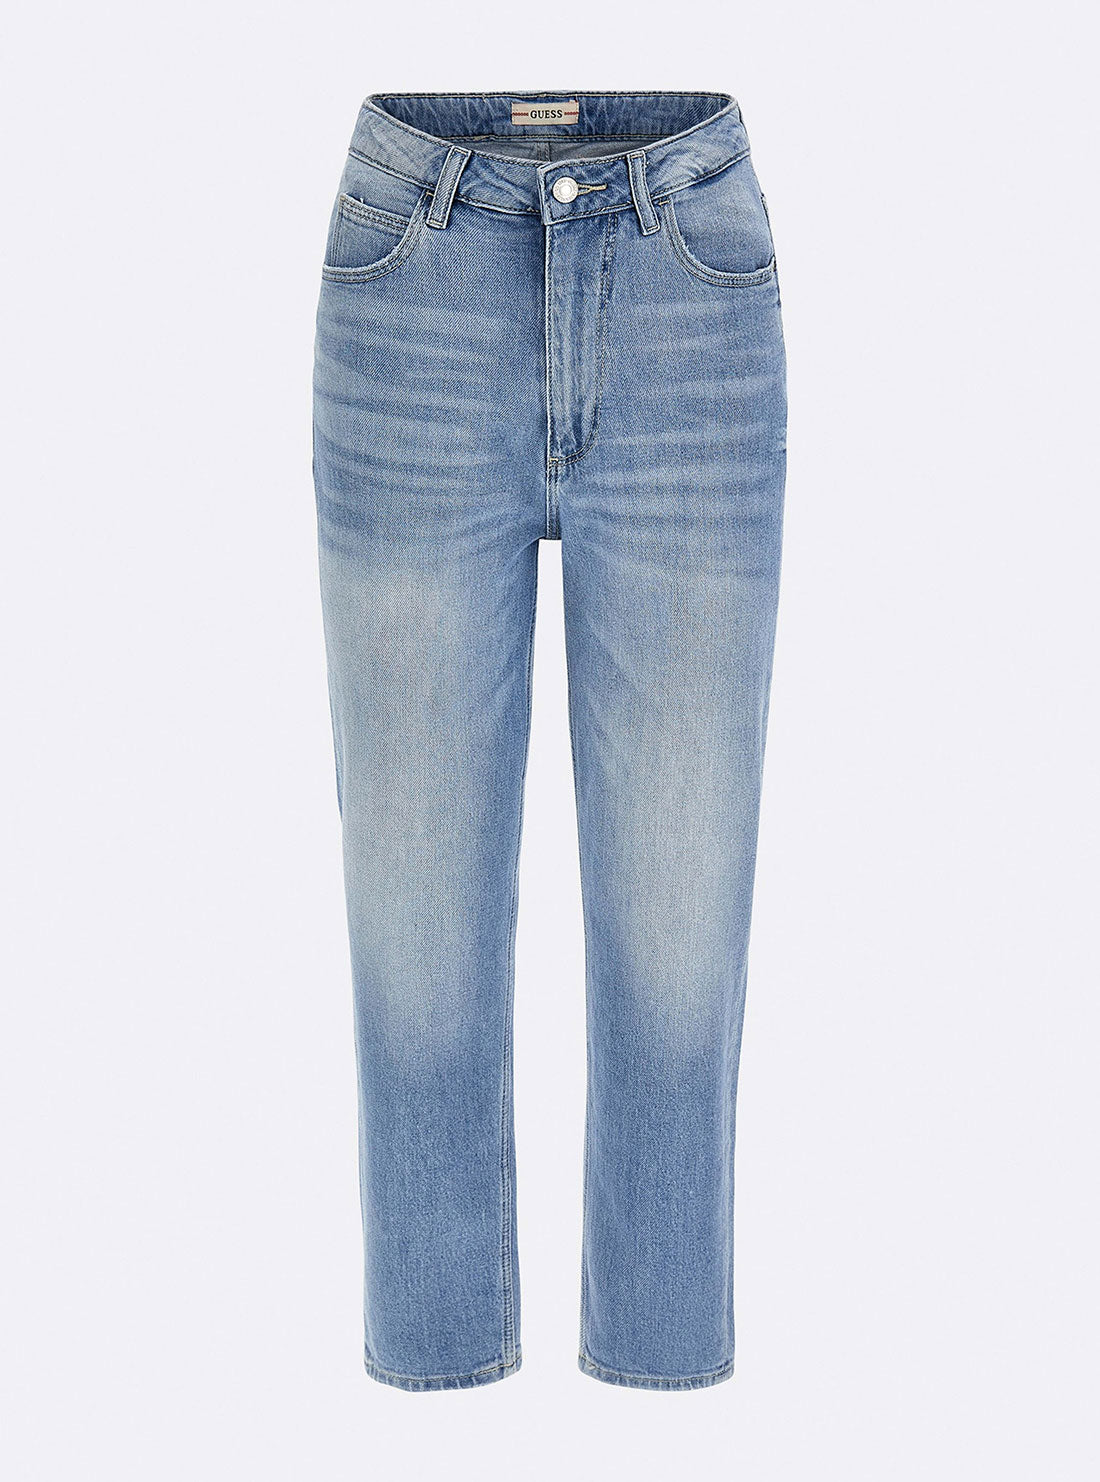 High-Rise Relaxed Fit Mom Denim Jeans In Bora Sky Wash